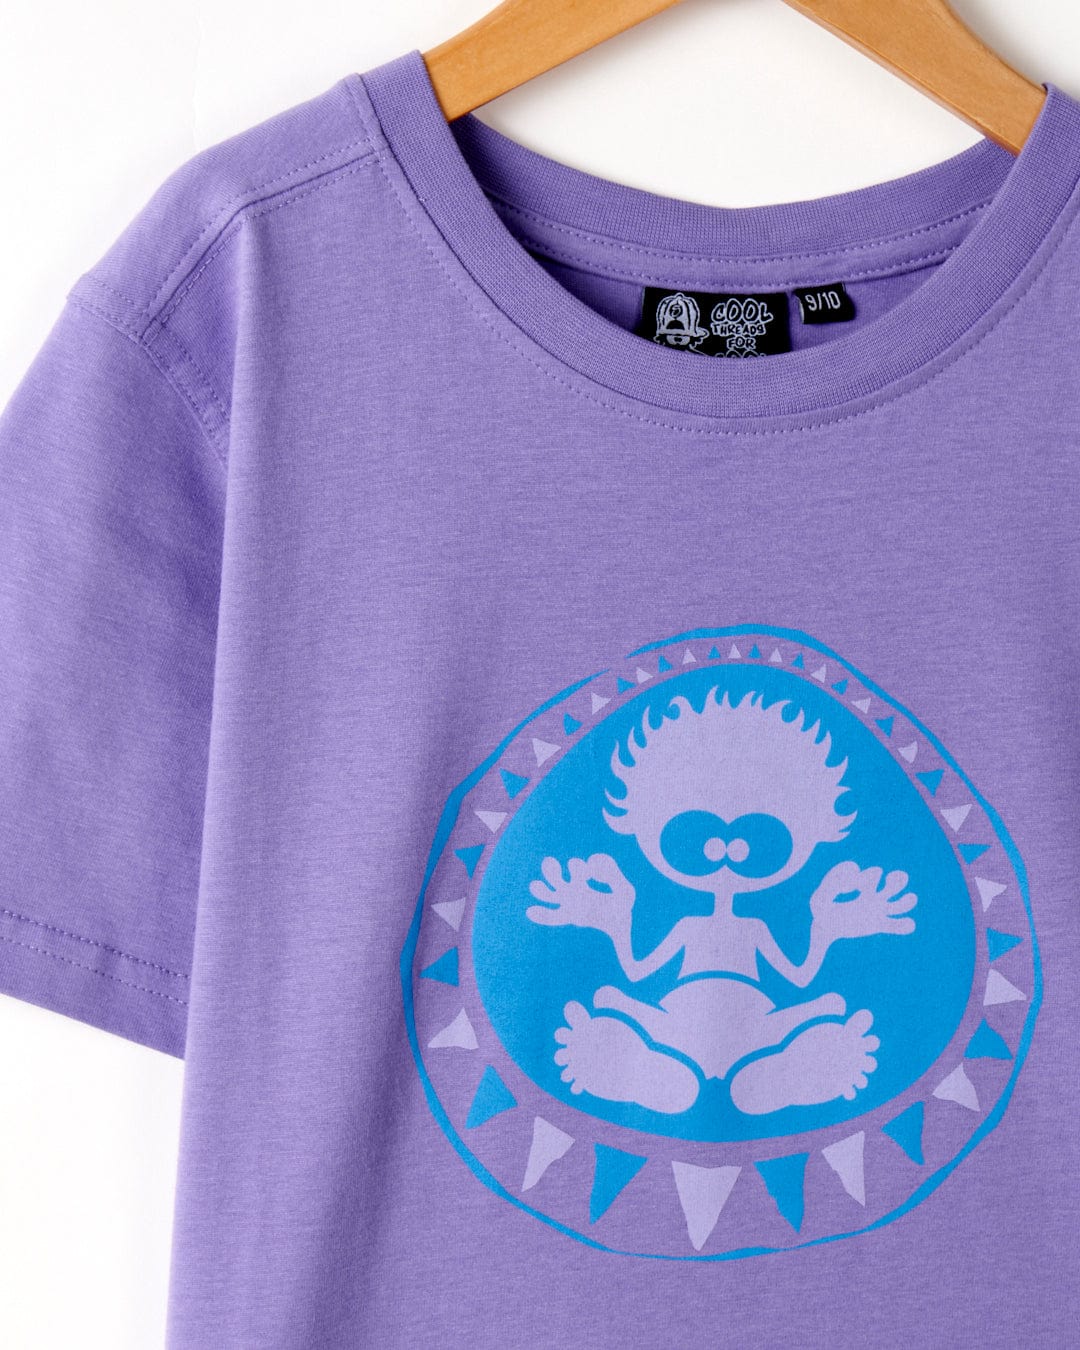 A Saltrock graphic purple t-shirt featuring a blue teddy bear image, perfect for a bohemian style.